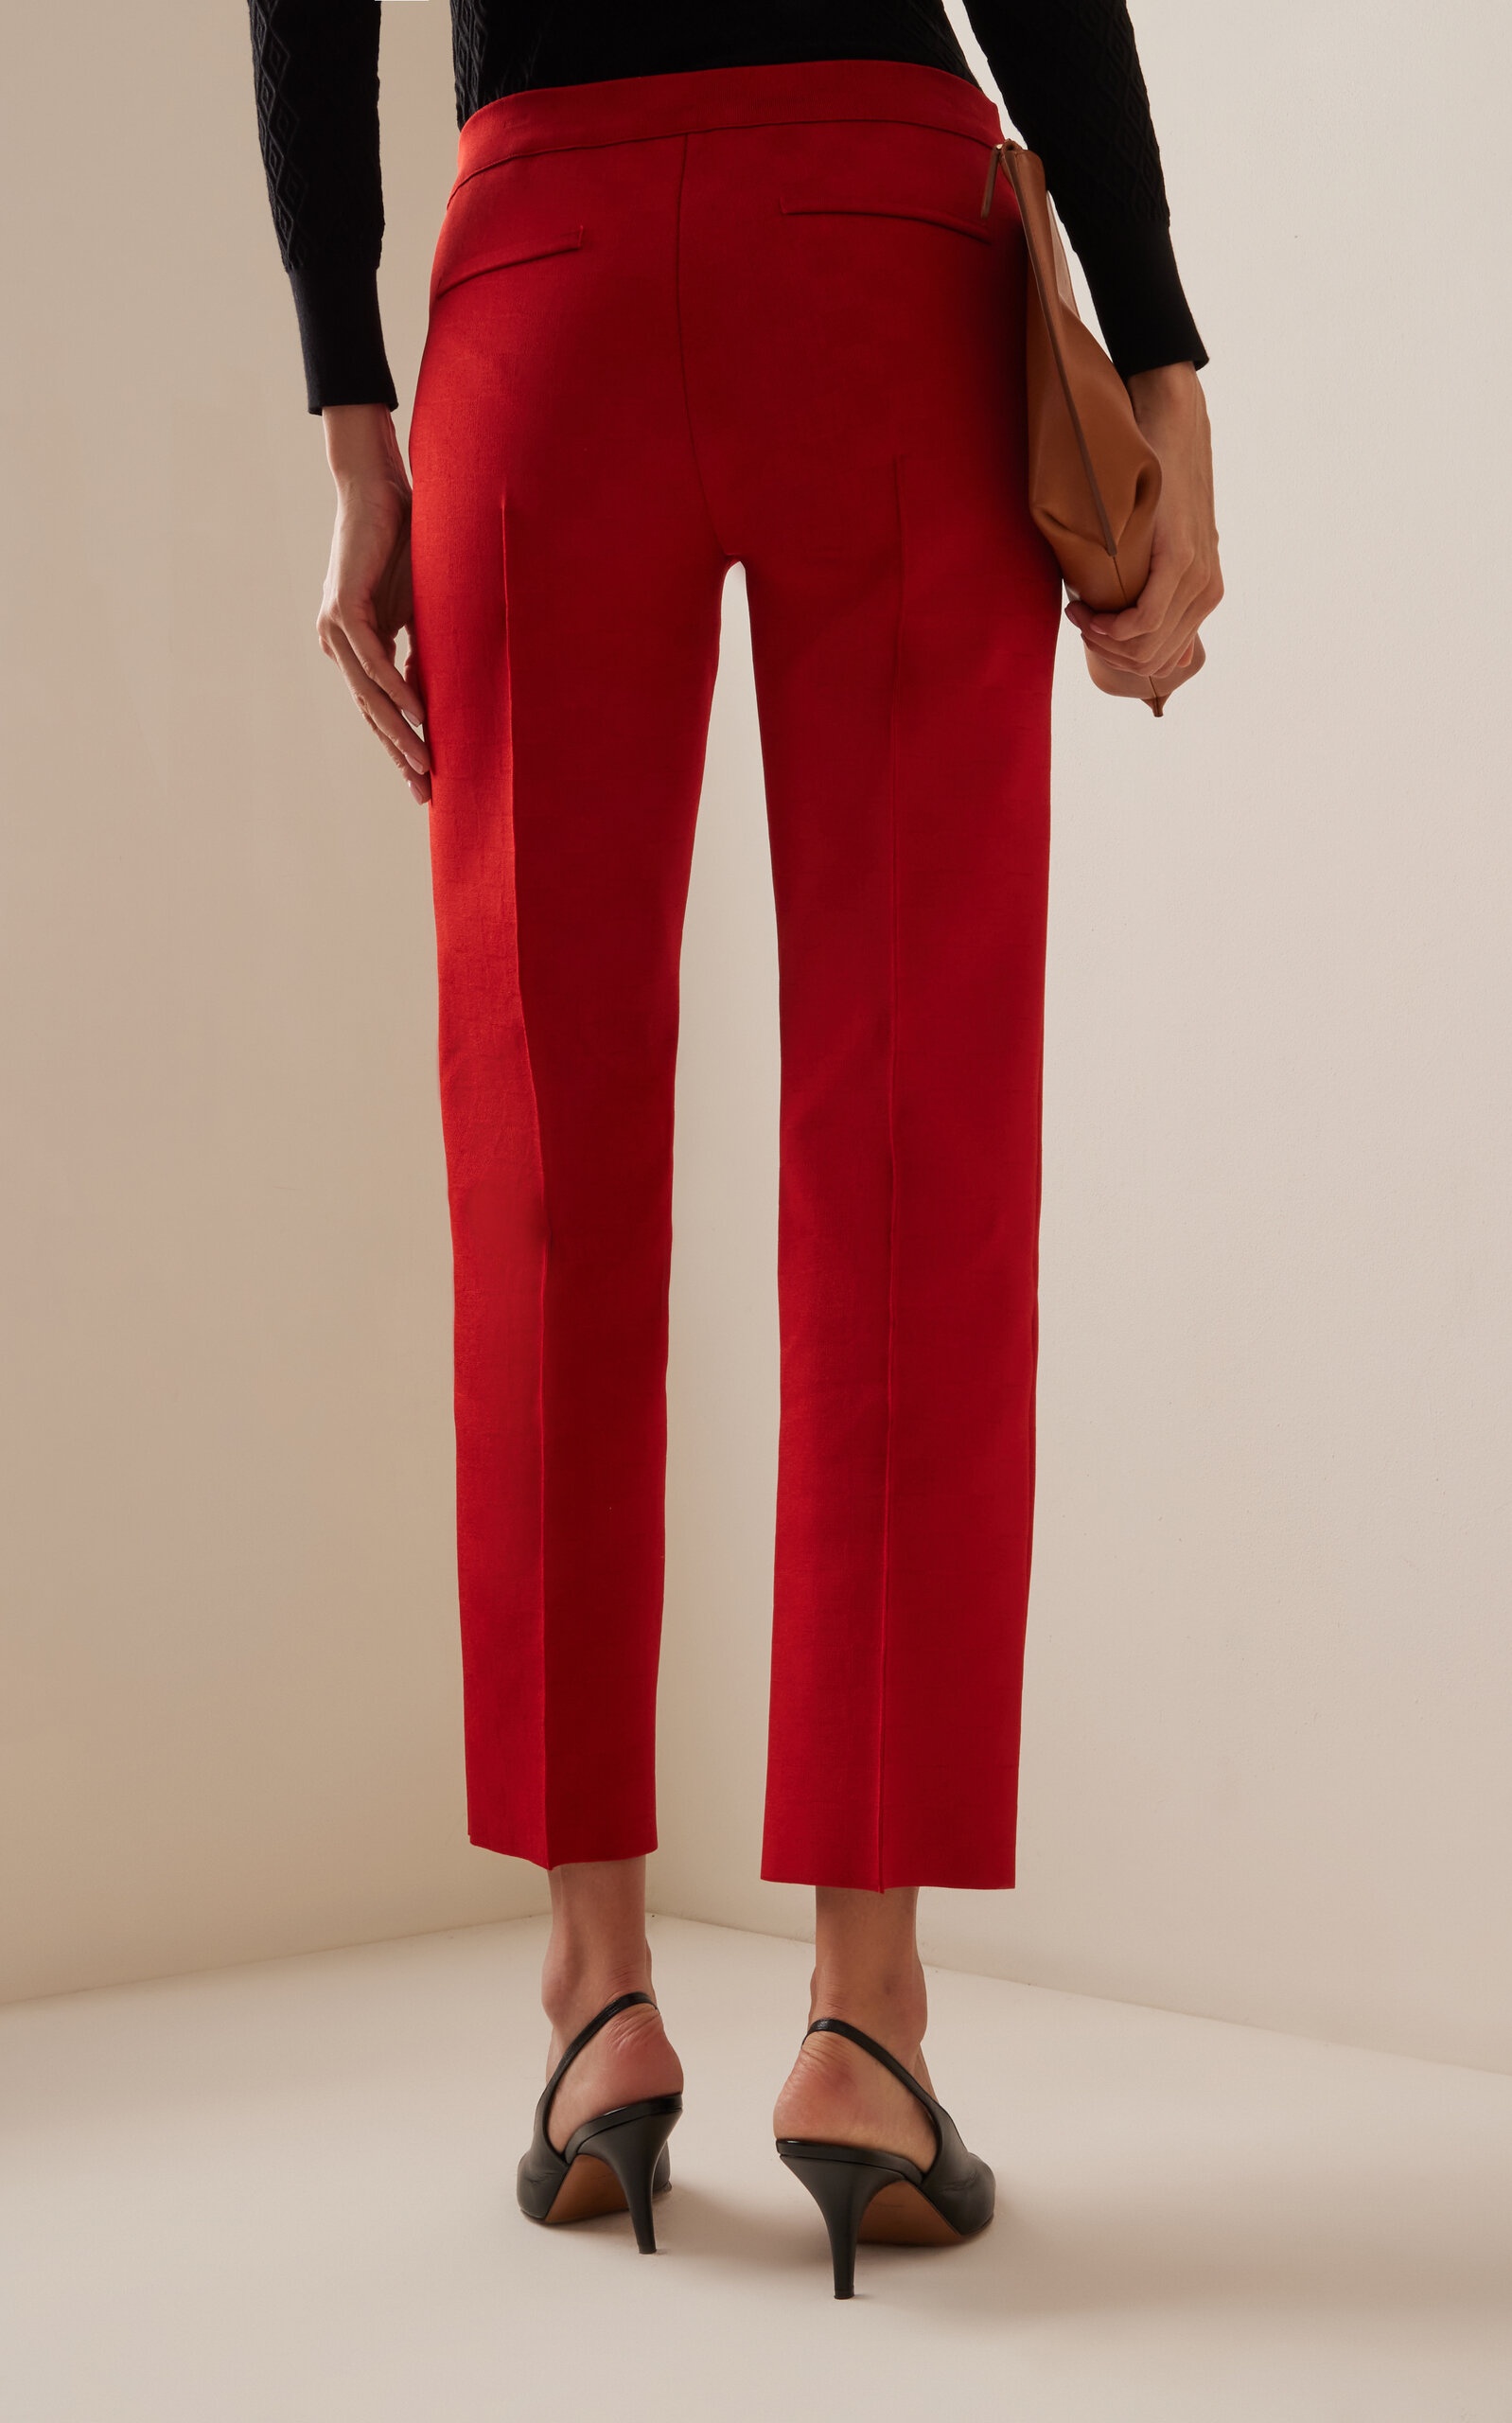 NSFW Jules Stretch Knit Pants red - 5